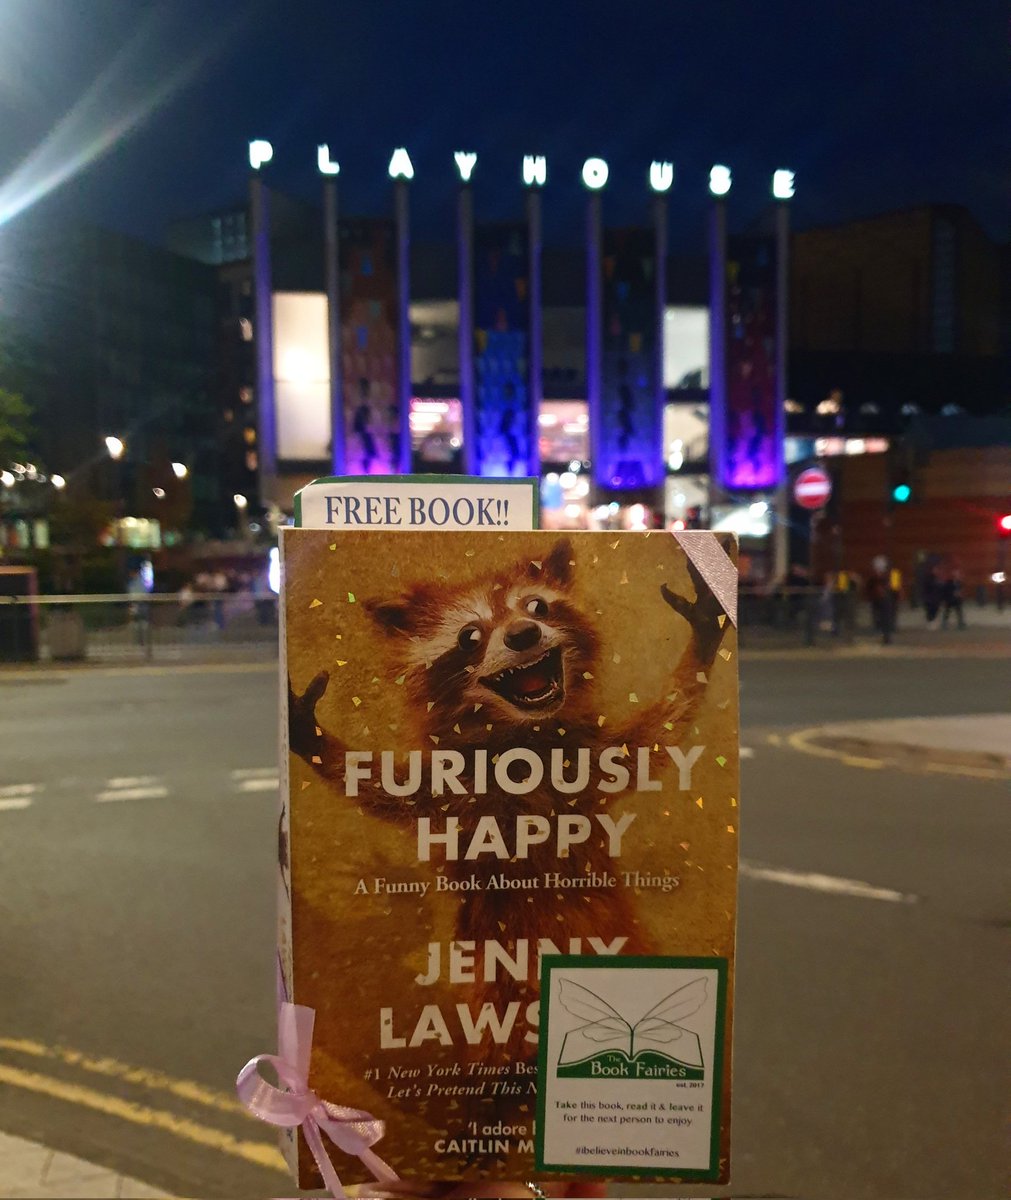 Did you find this copy of 'Furiously Happy' by @TheBloggess outside @LeedsPlayhouse last night? 📖🧚‍♀️ @the_bookfairies #IBelieveInBookFairies #BookTwitter #LeedsPlayHouse